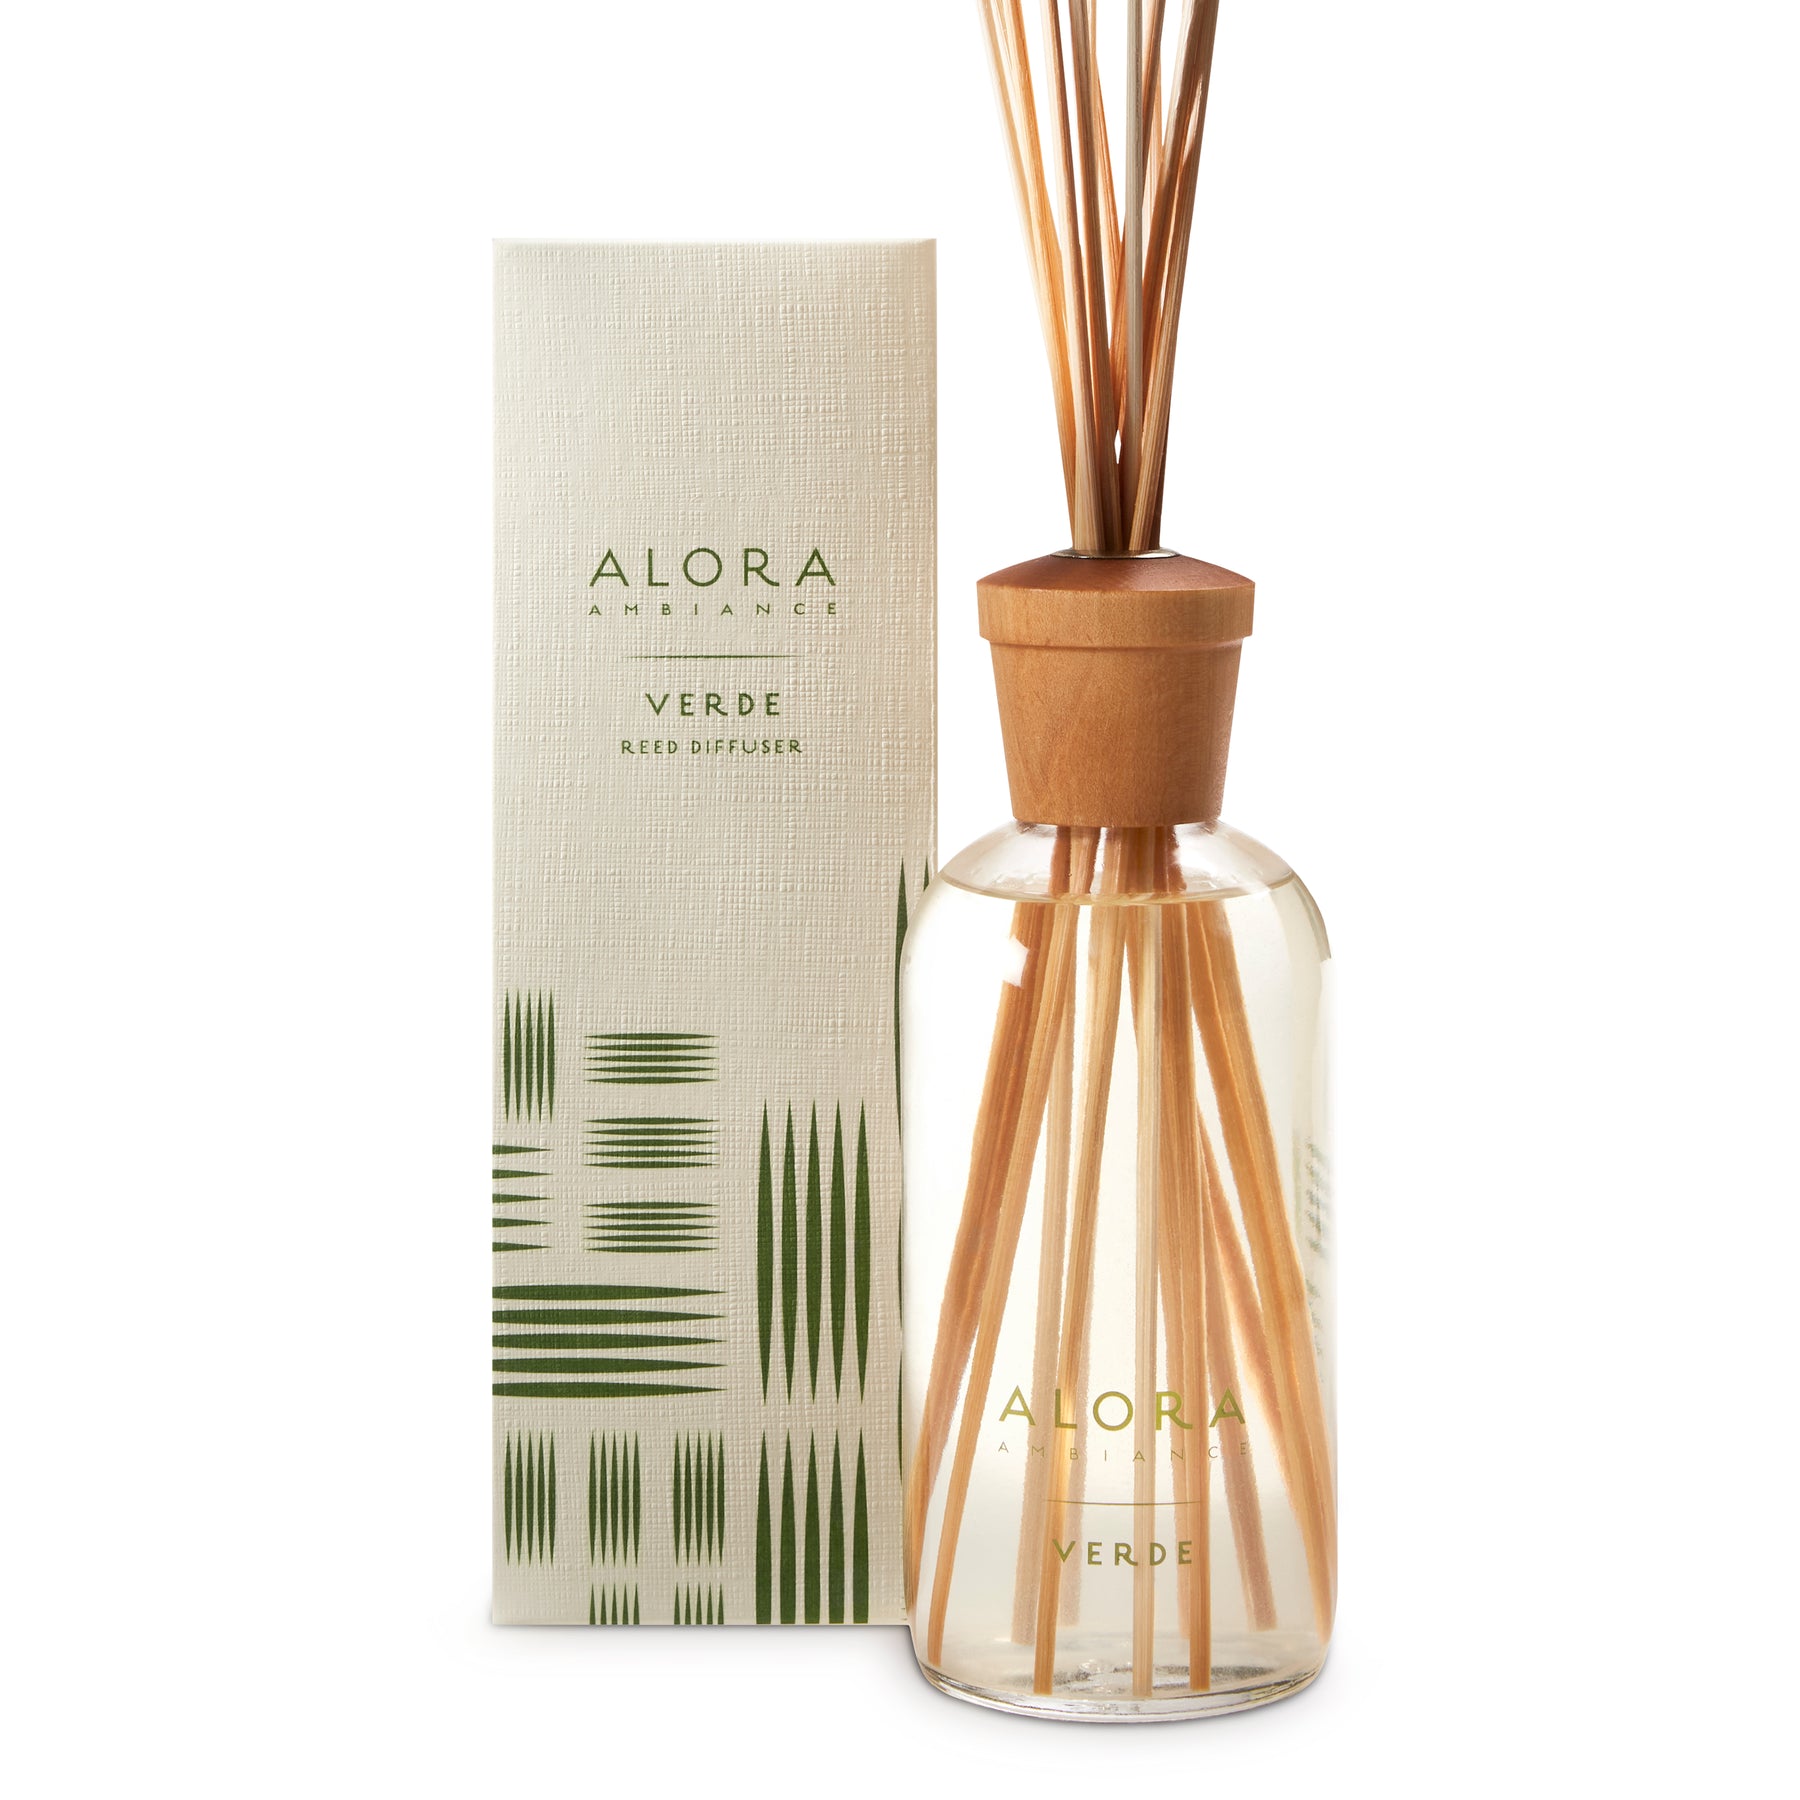 Alora Ambiance Reed Diffuser, Verde, 8 oz.